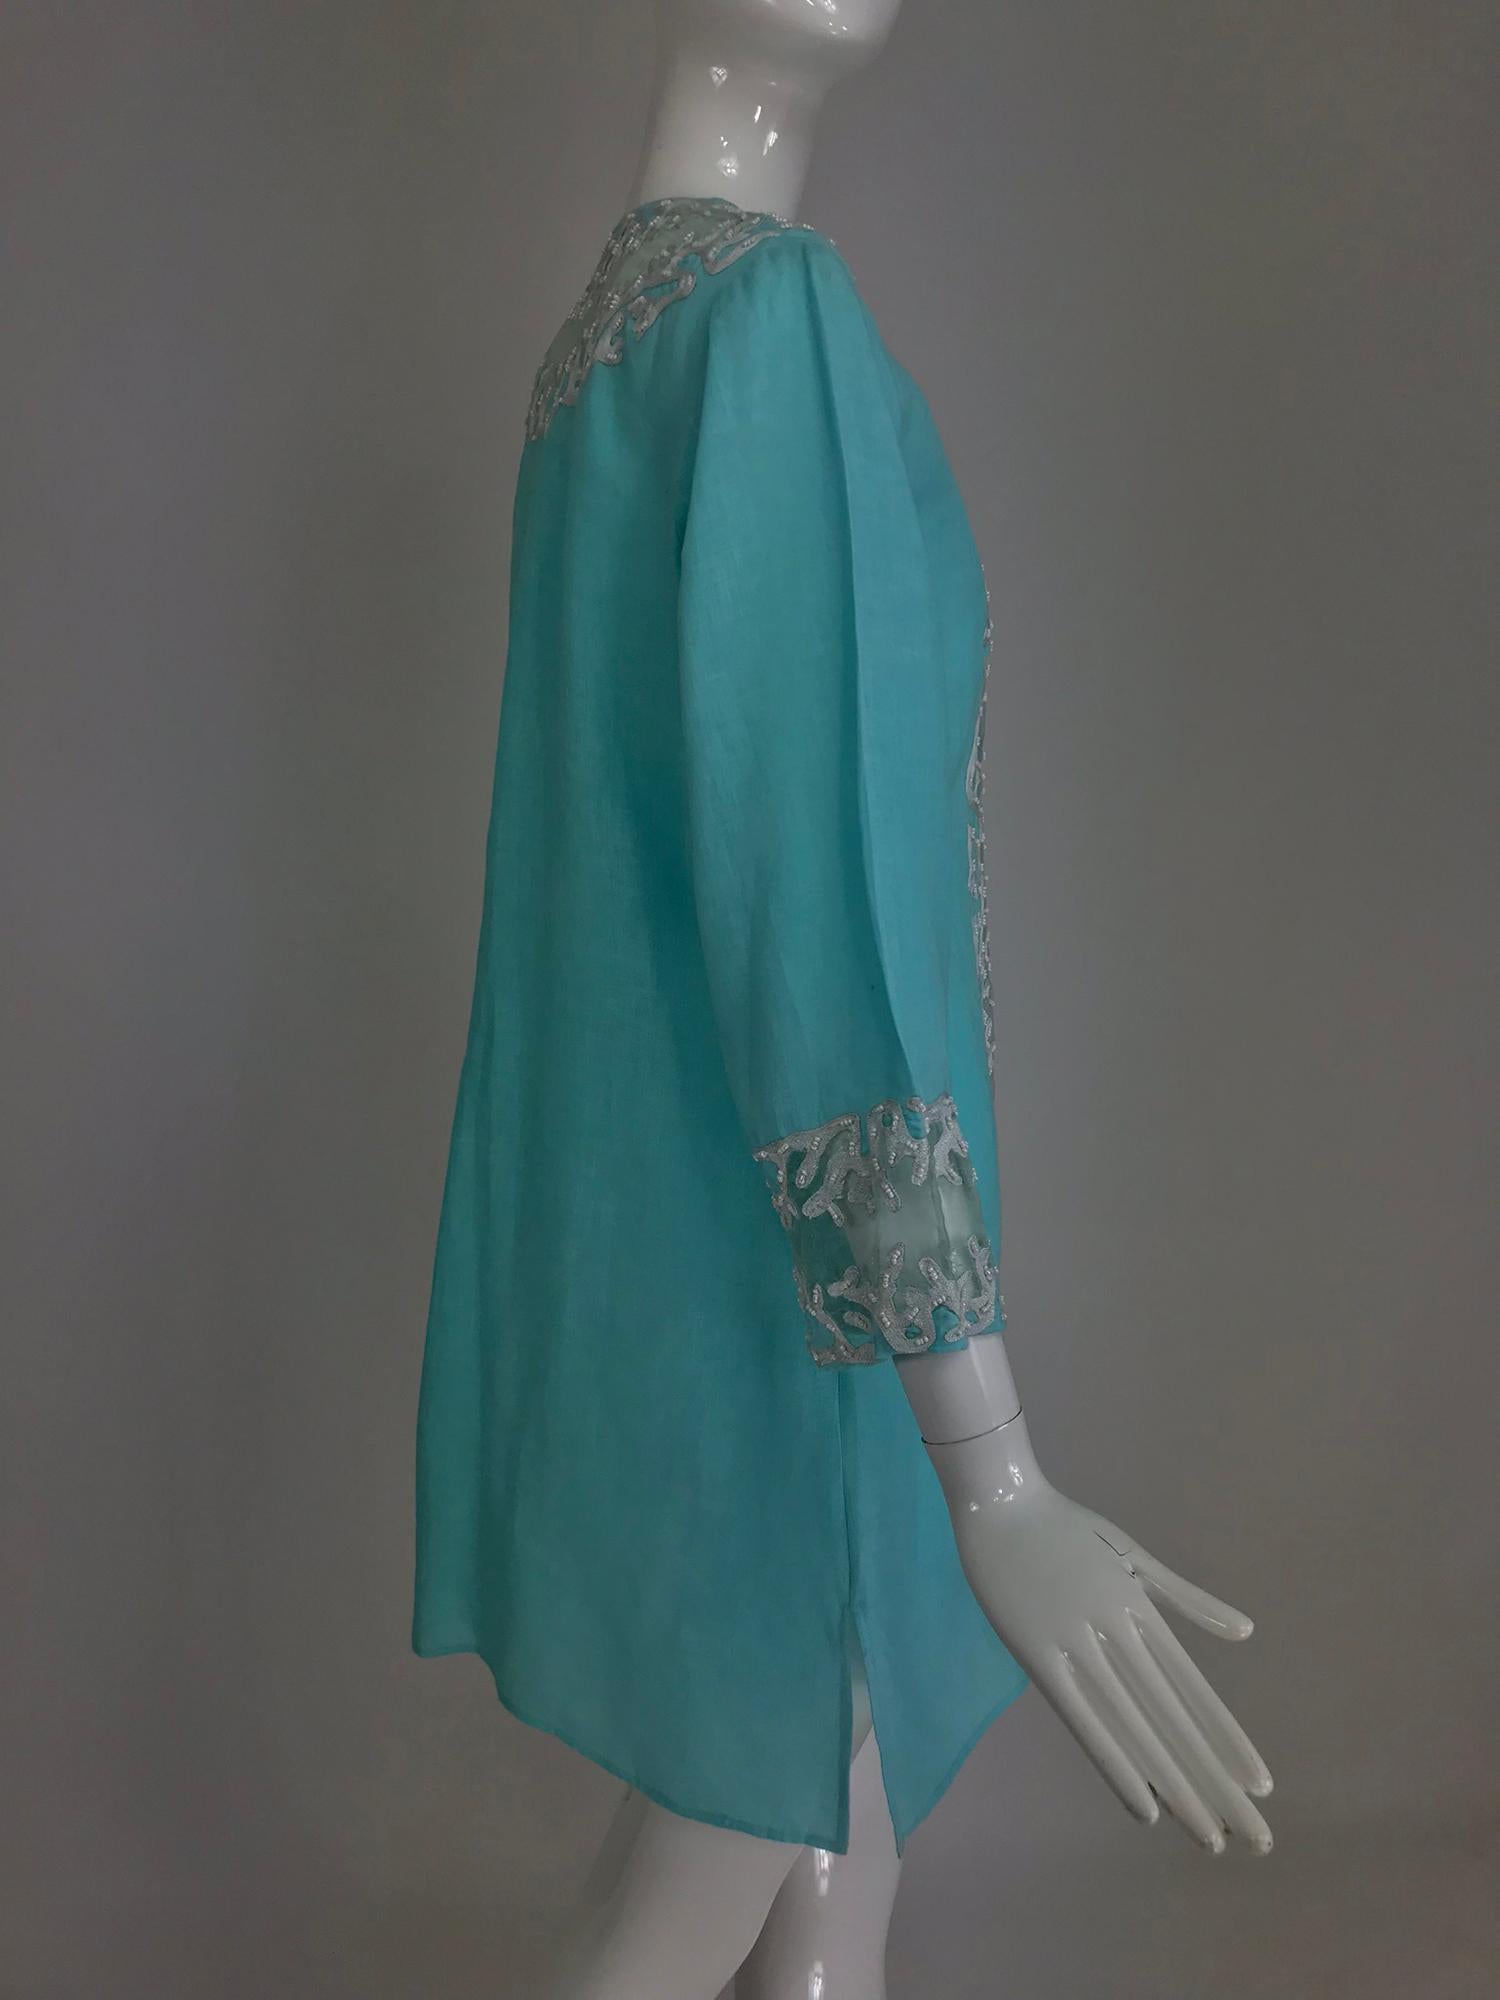 Jeannie McQueeny turquoise linen embroidered silk organza long jacket.  6